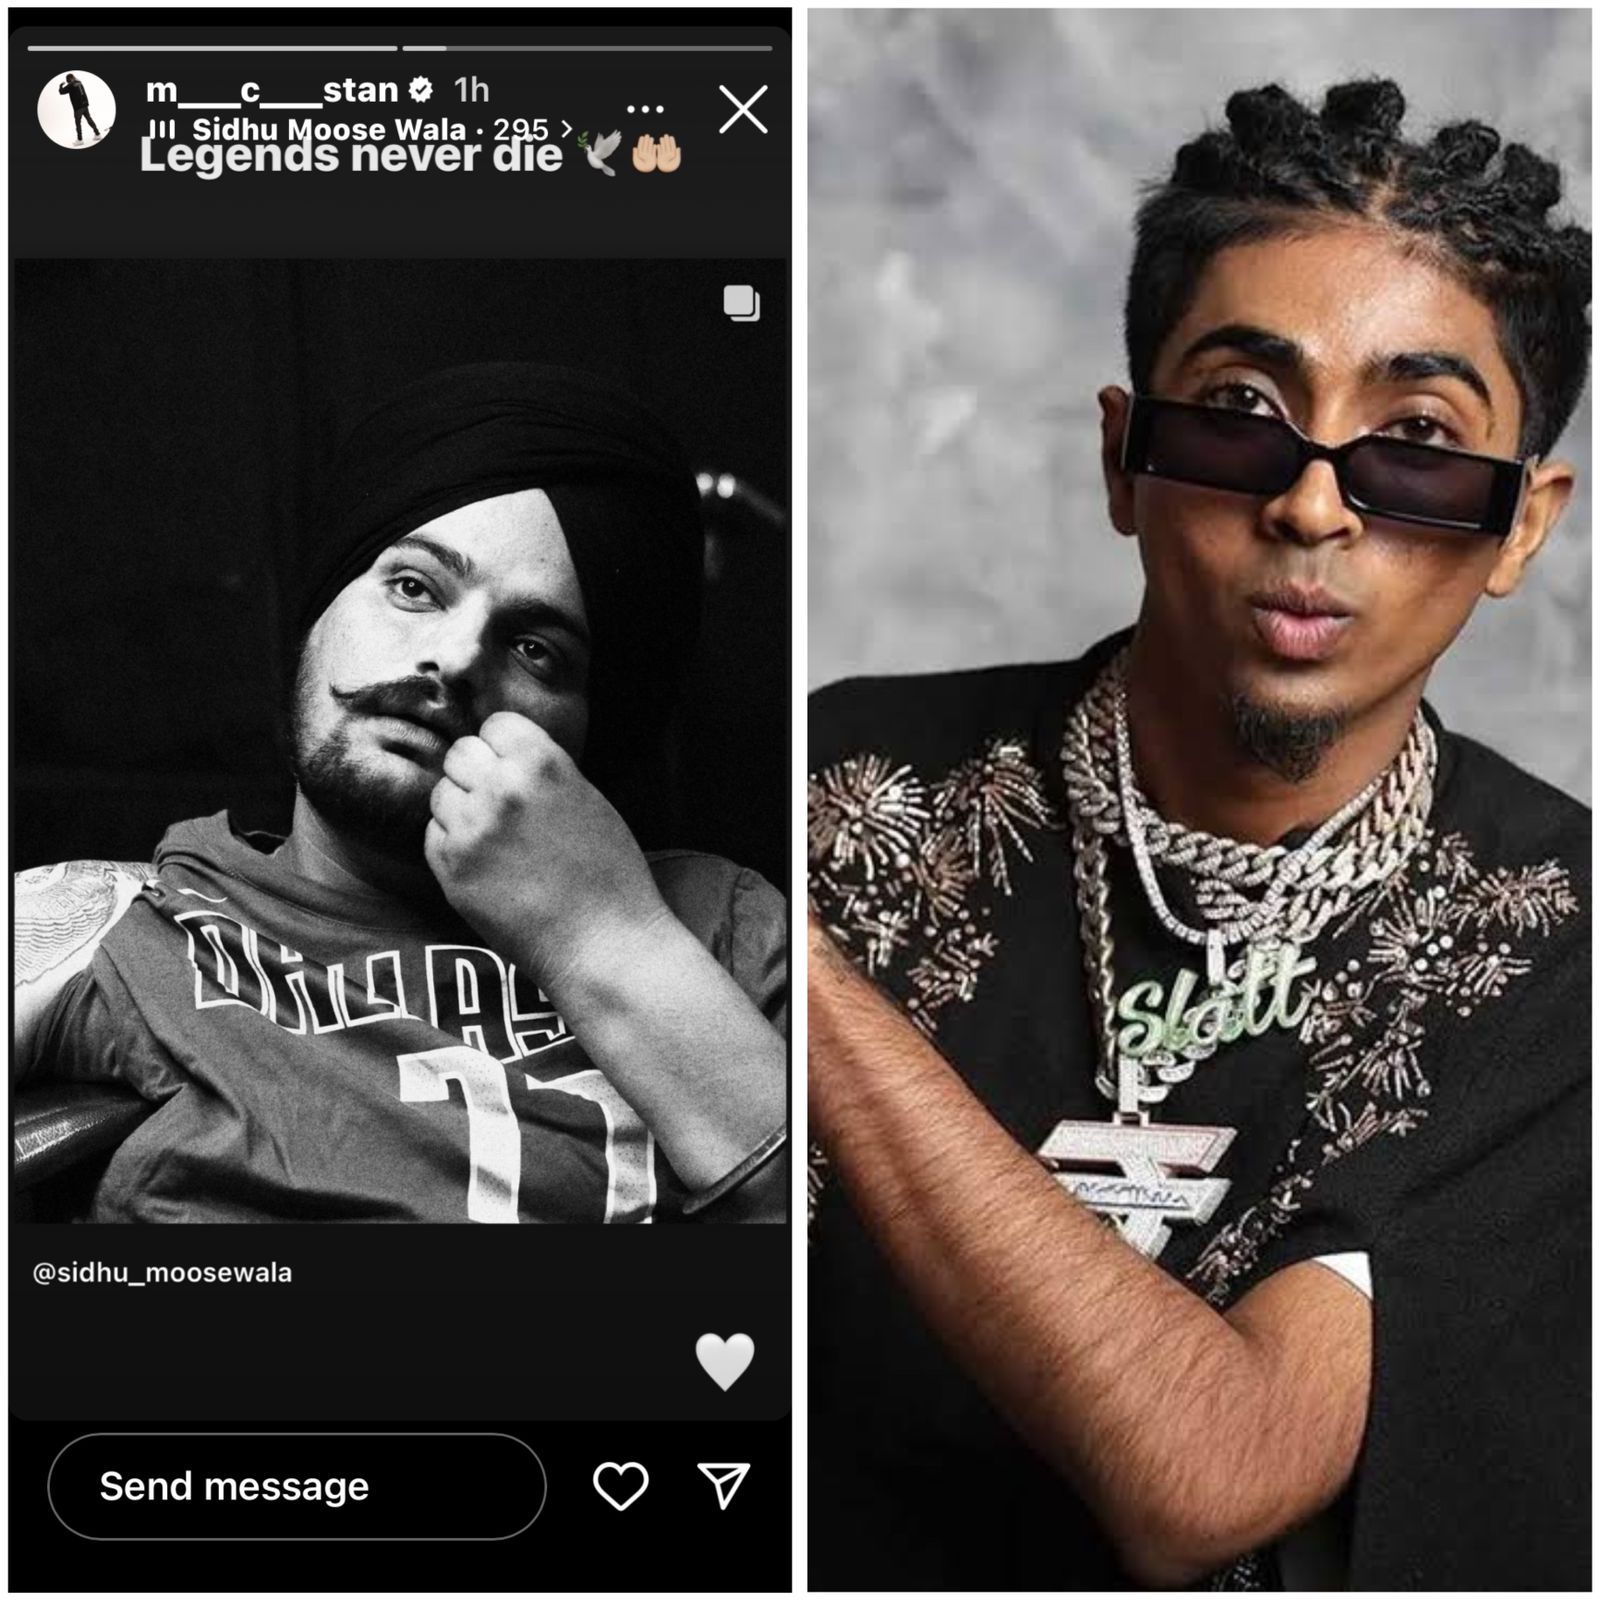 Rapper MC Stan honors Sidhu Moose Wala on his death anniversary with a touching Instagram story, says 'Legends never die